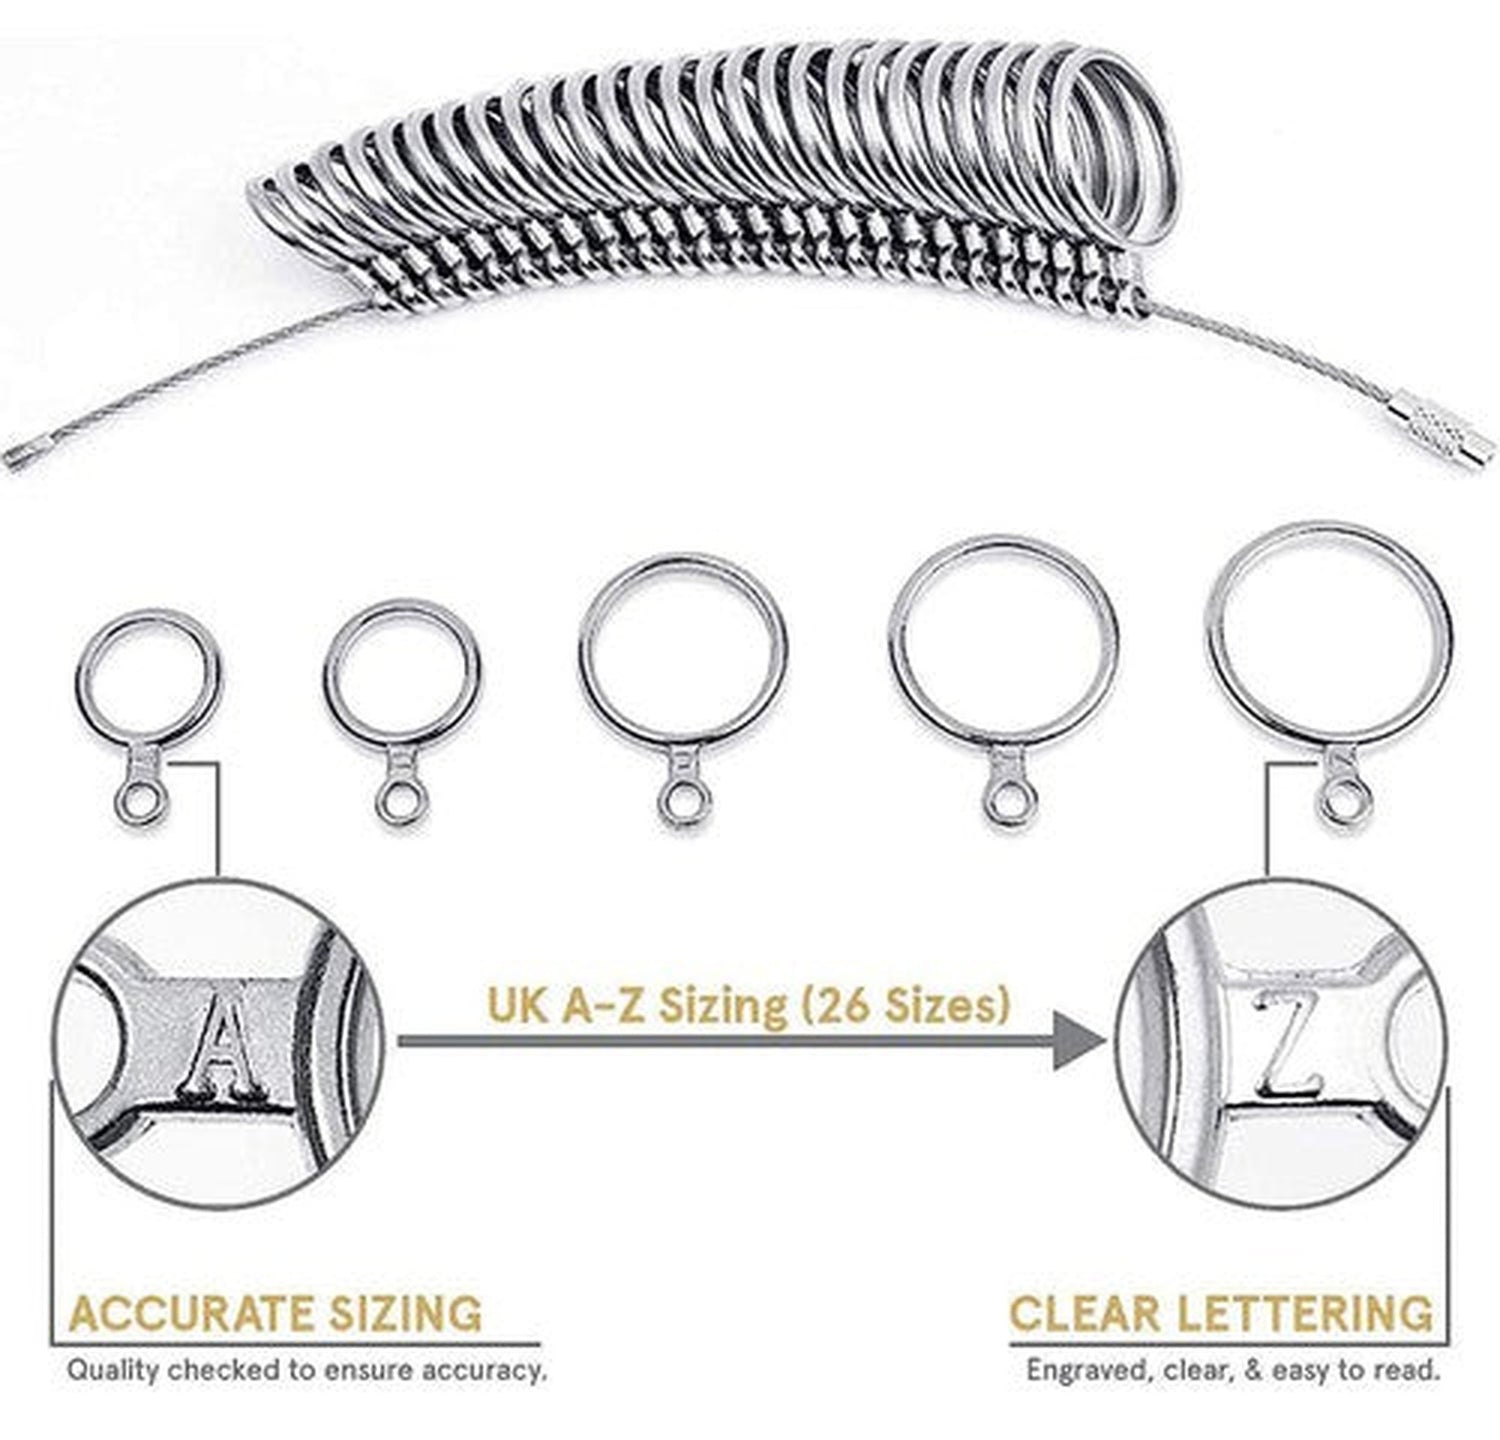 The Heavenly Ring Sizer